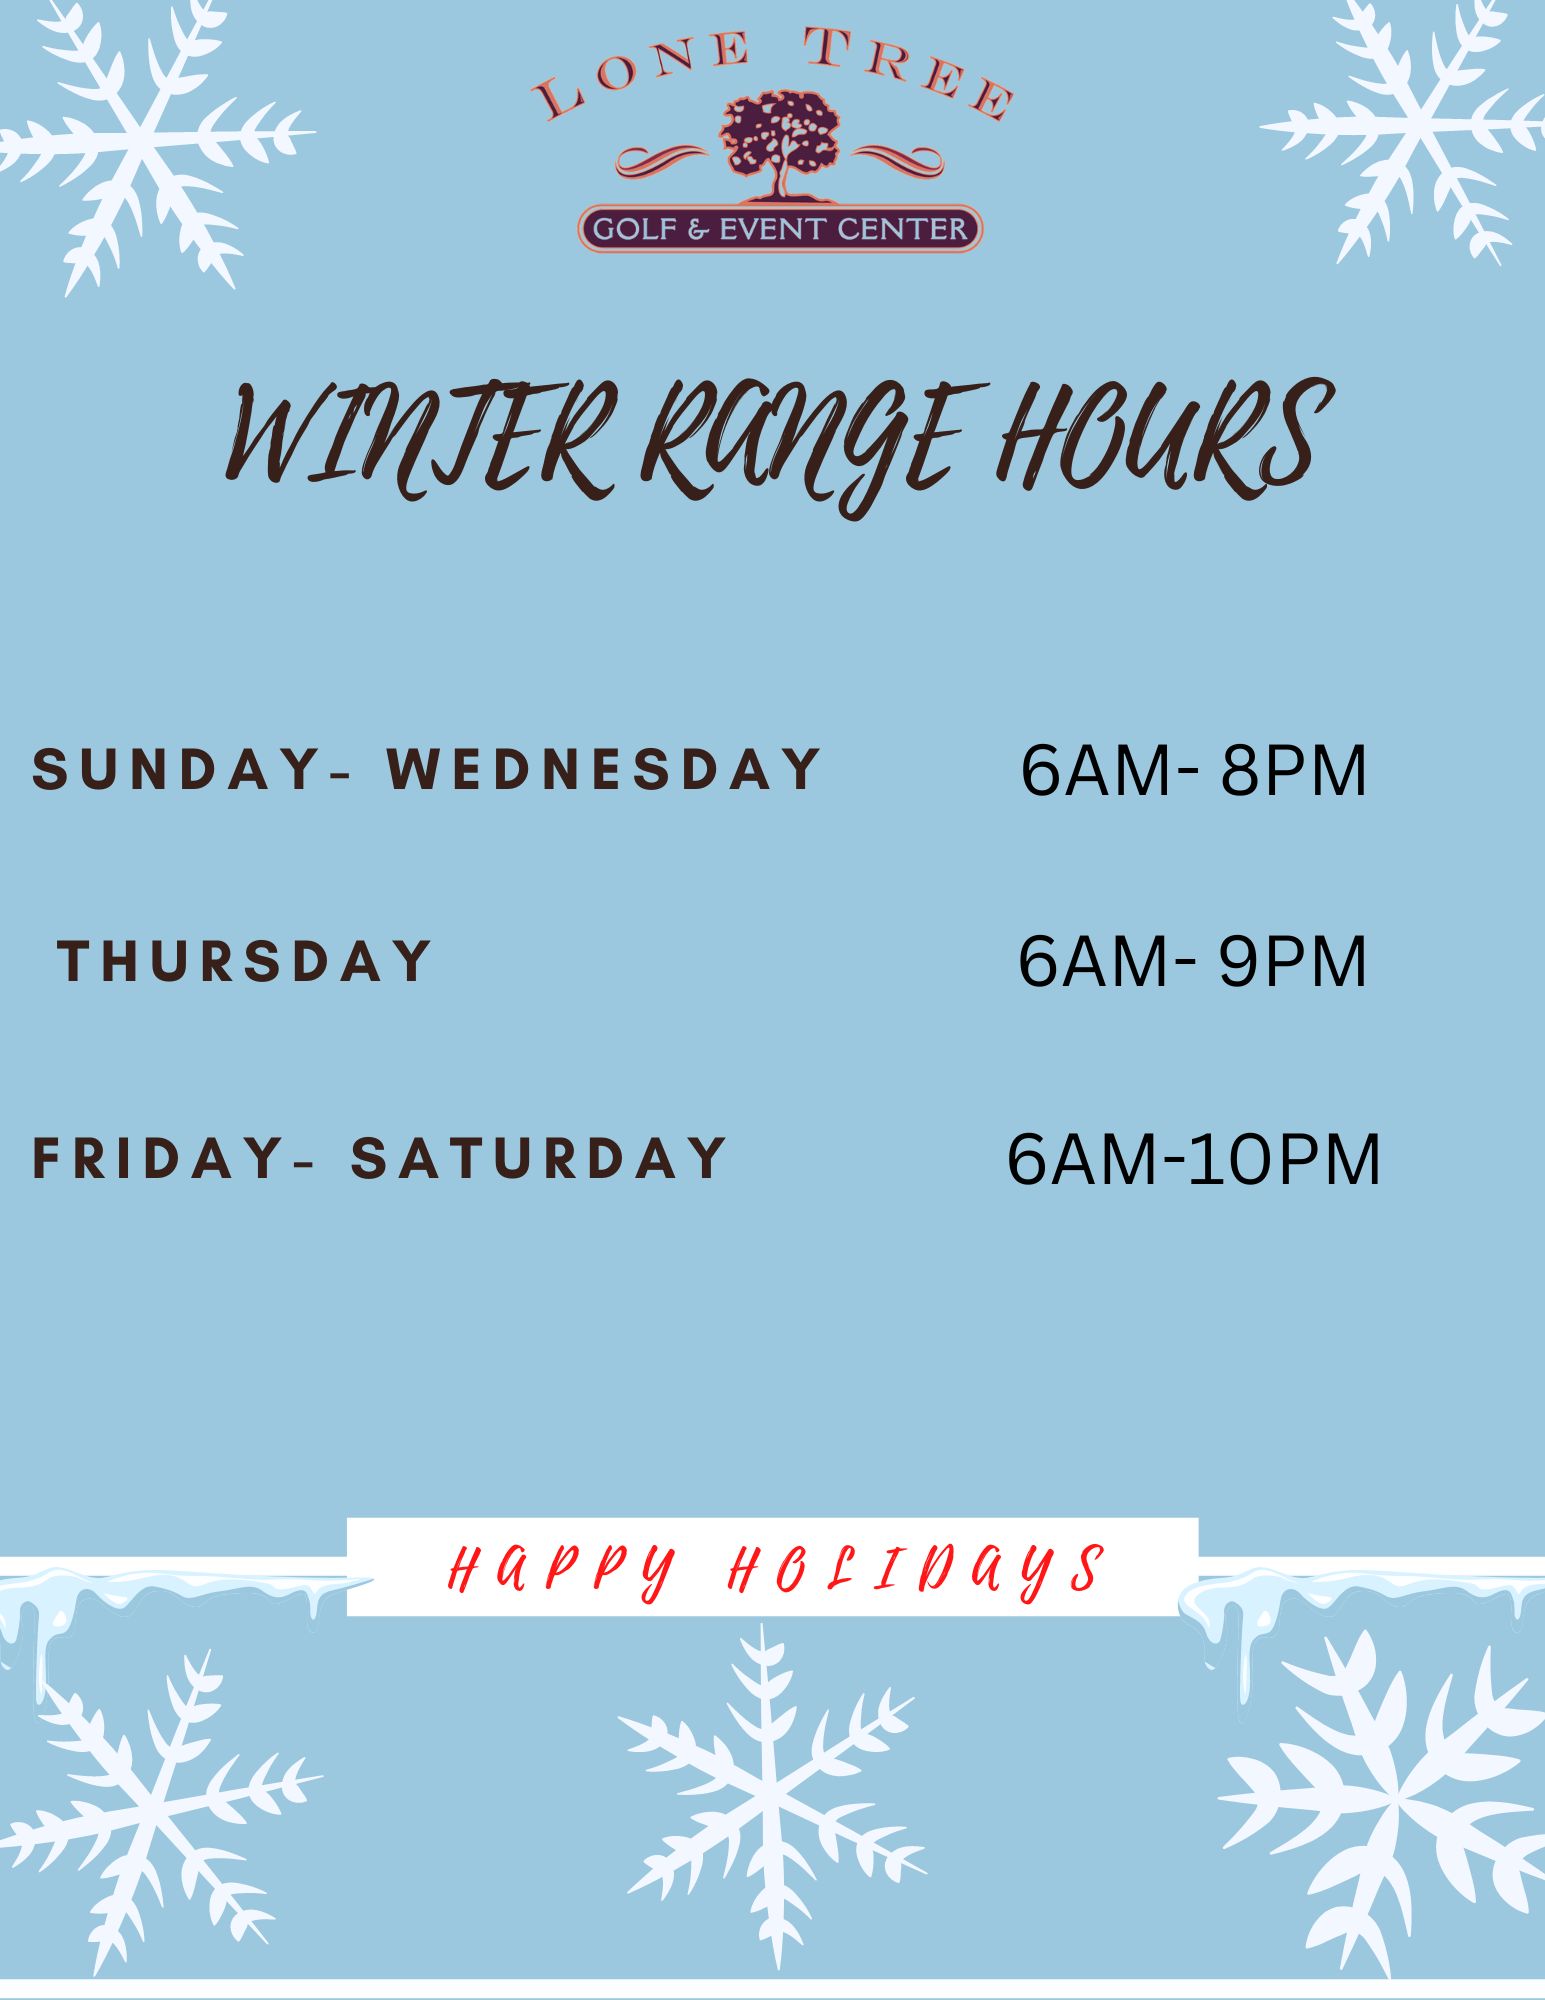 Rnage Hours Winter